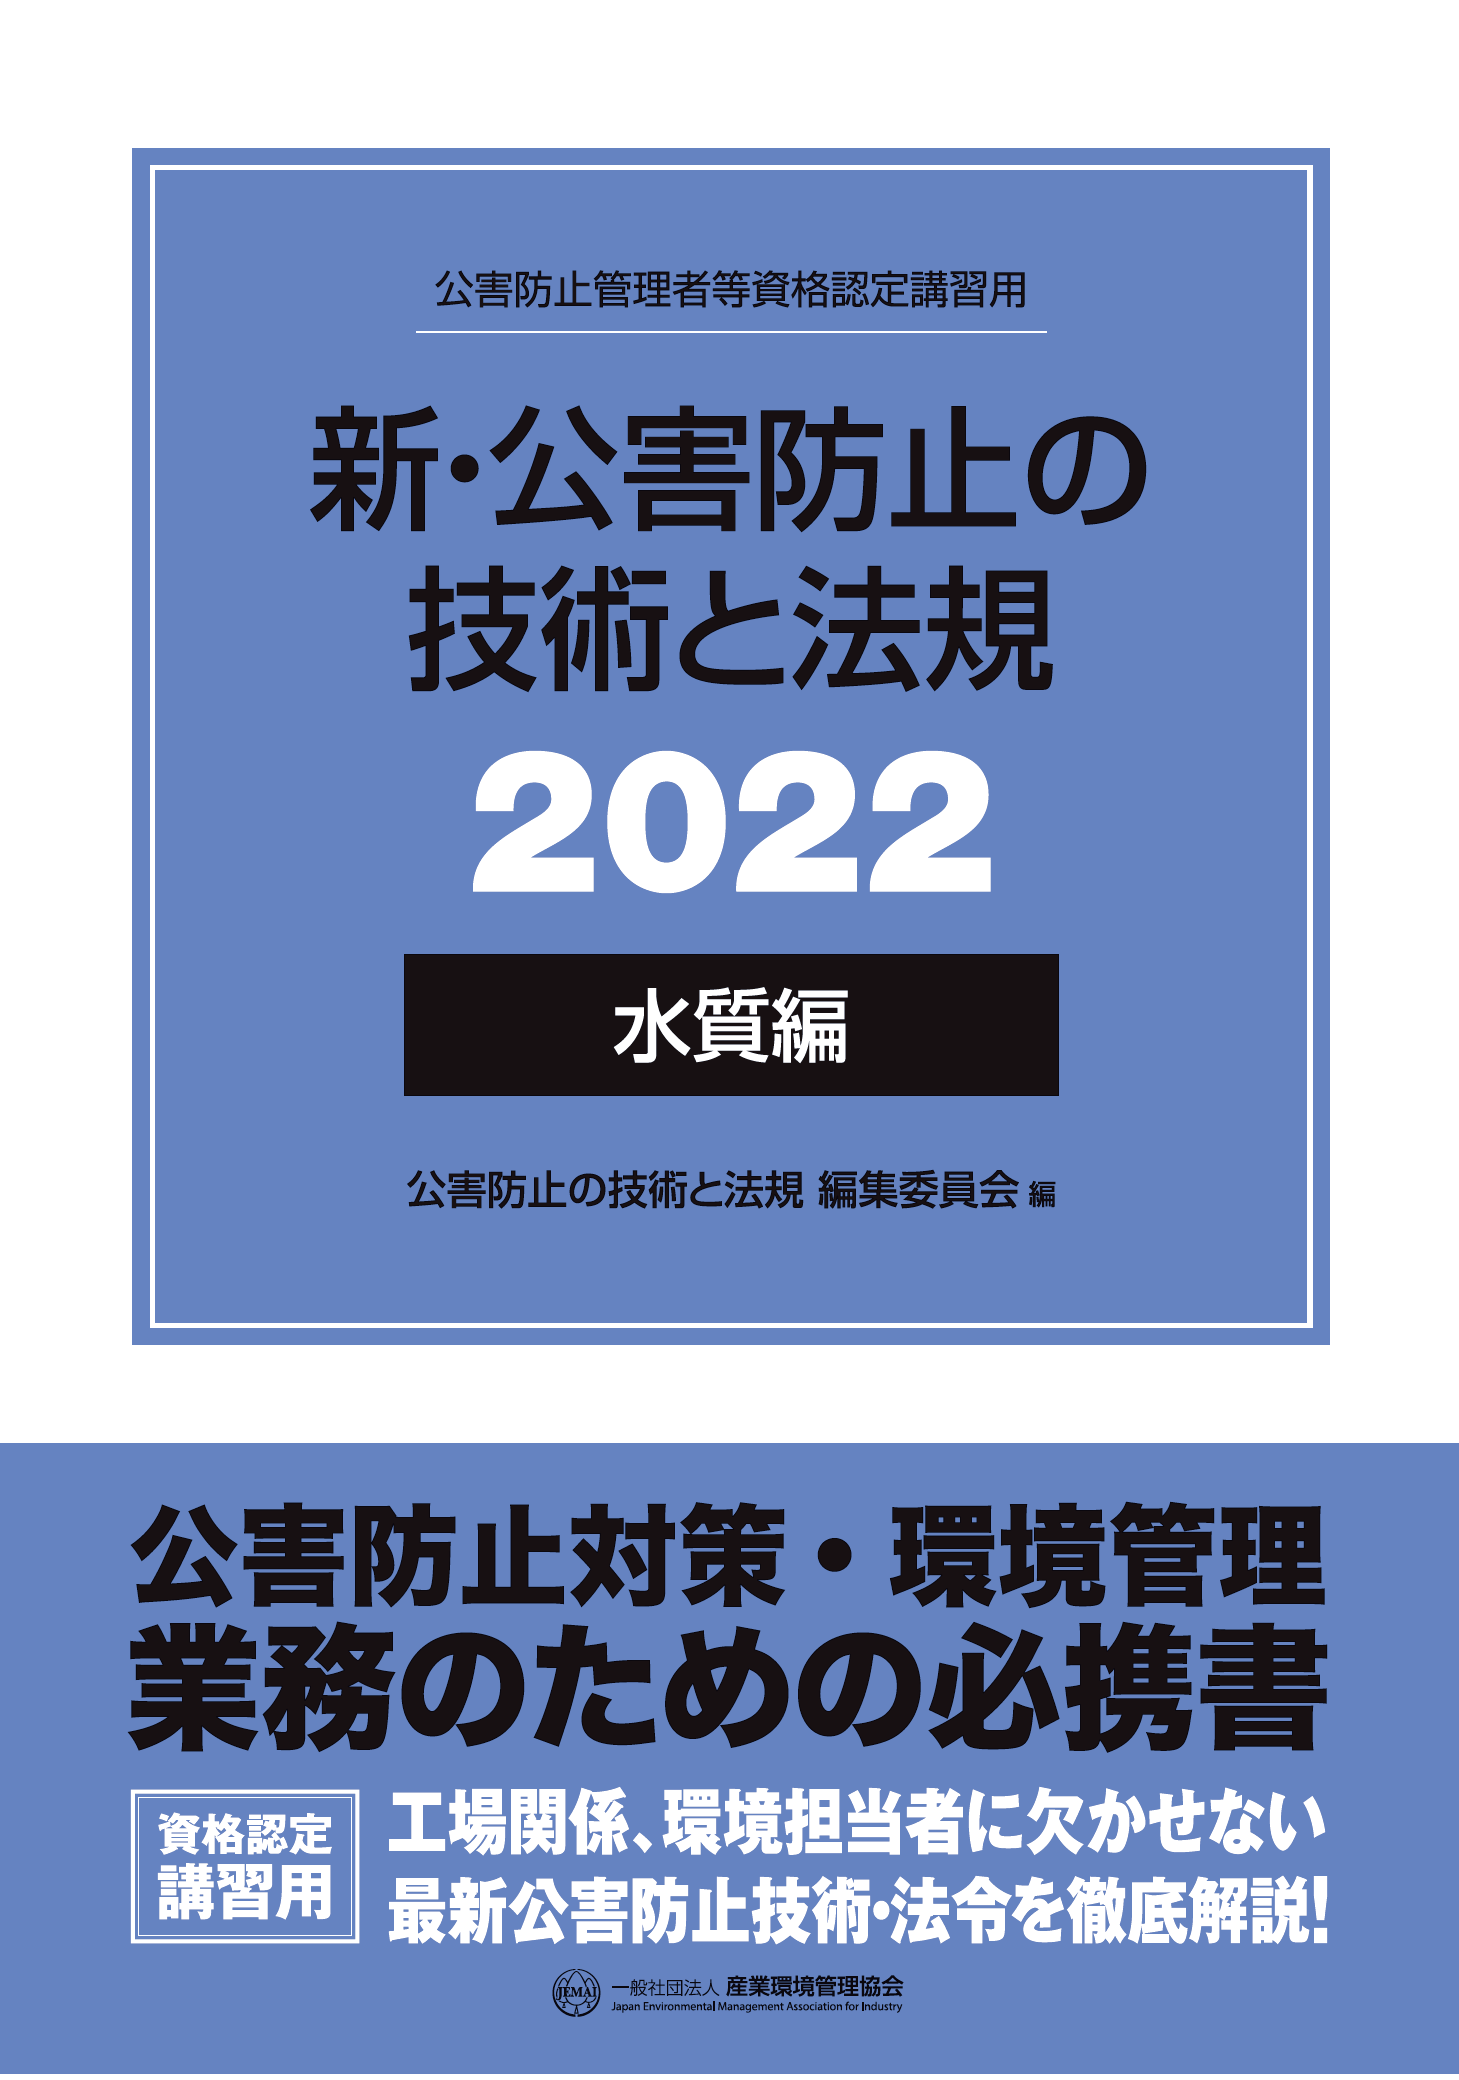 02_water2022.png